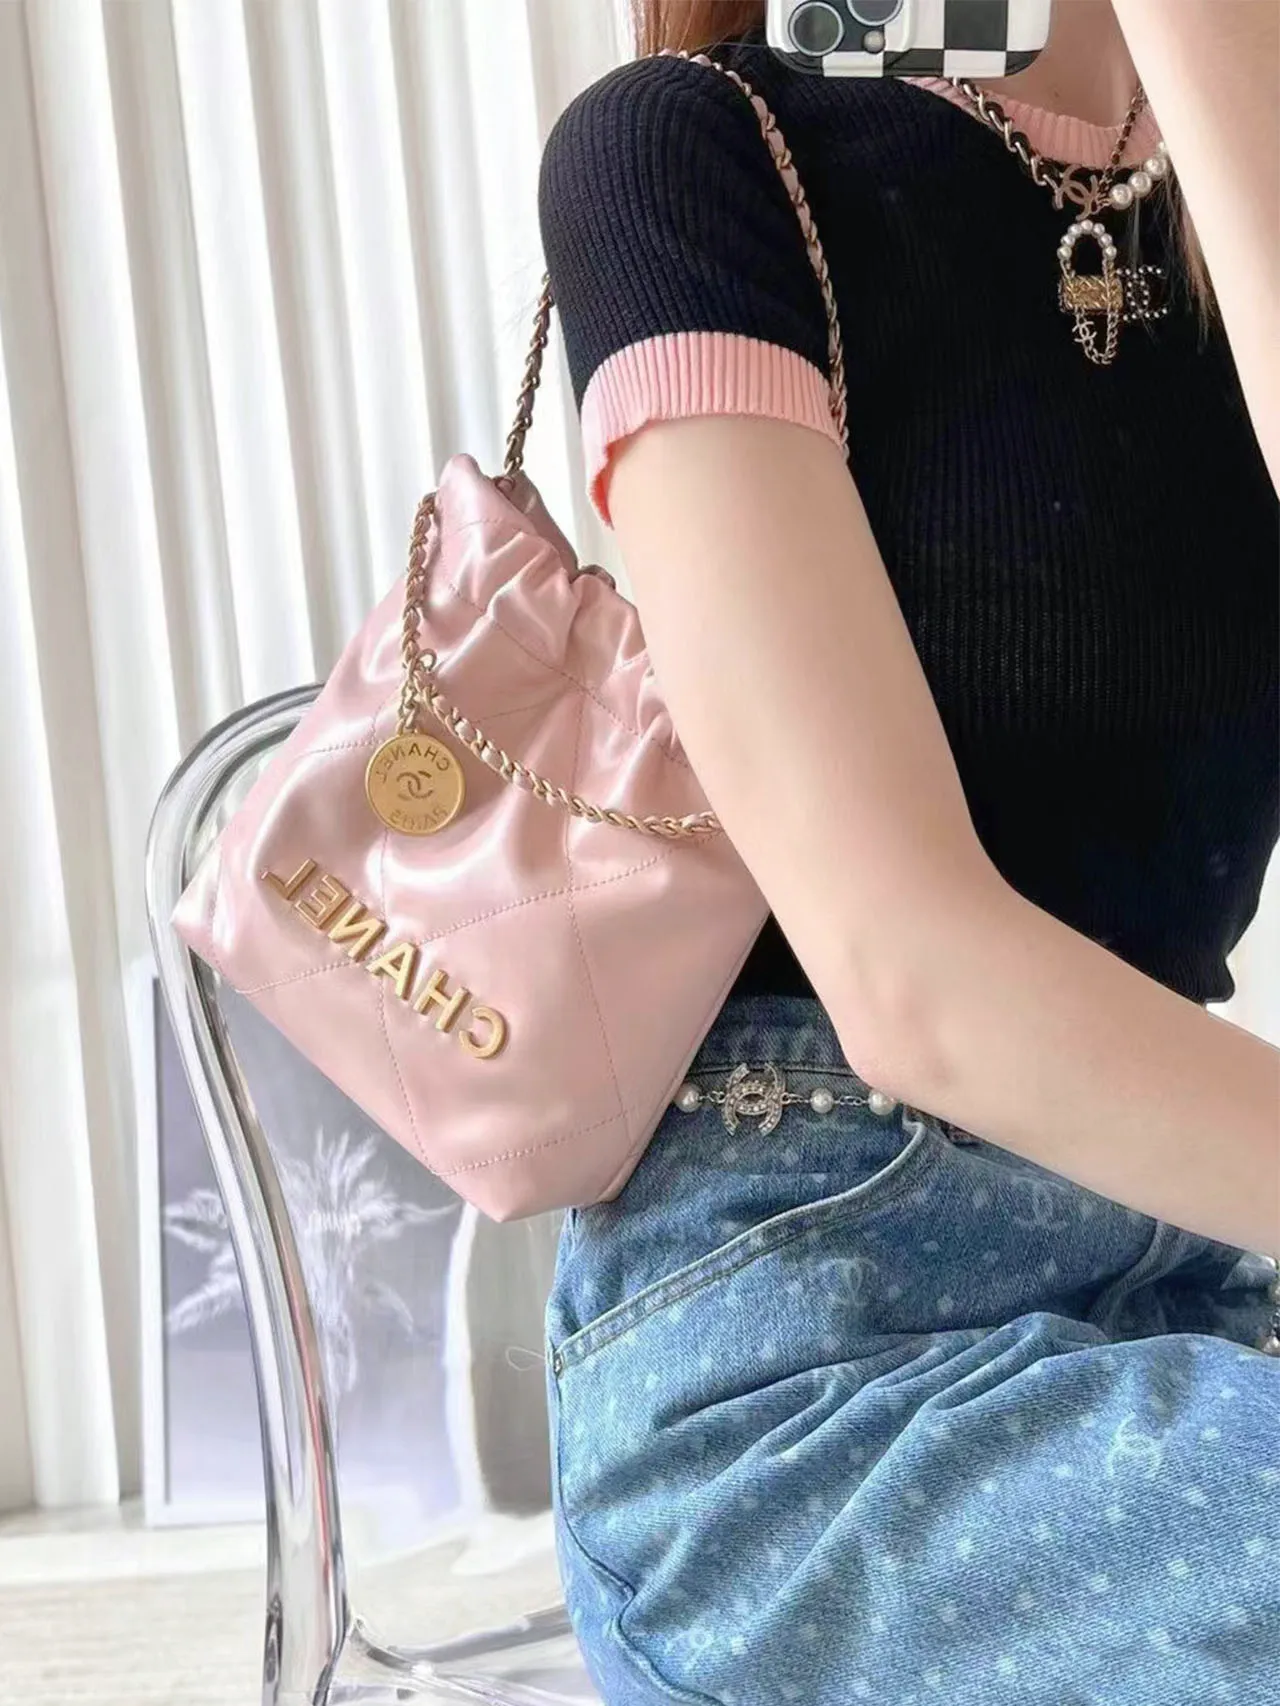 The long-waited Chanel 22 bag mini is finally here, Gallery posted by  banyu_yi